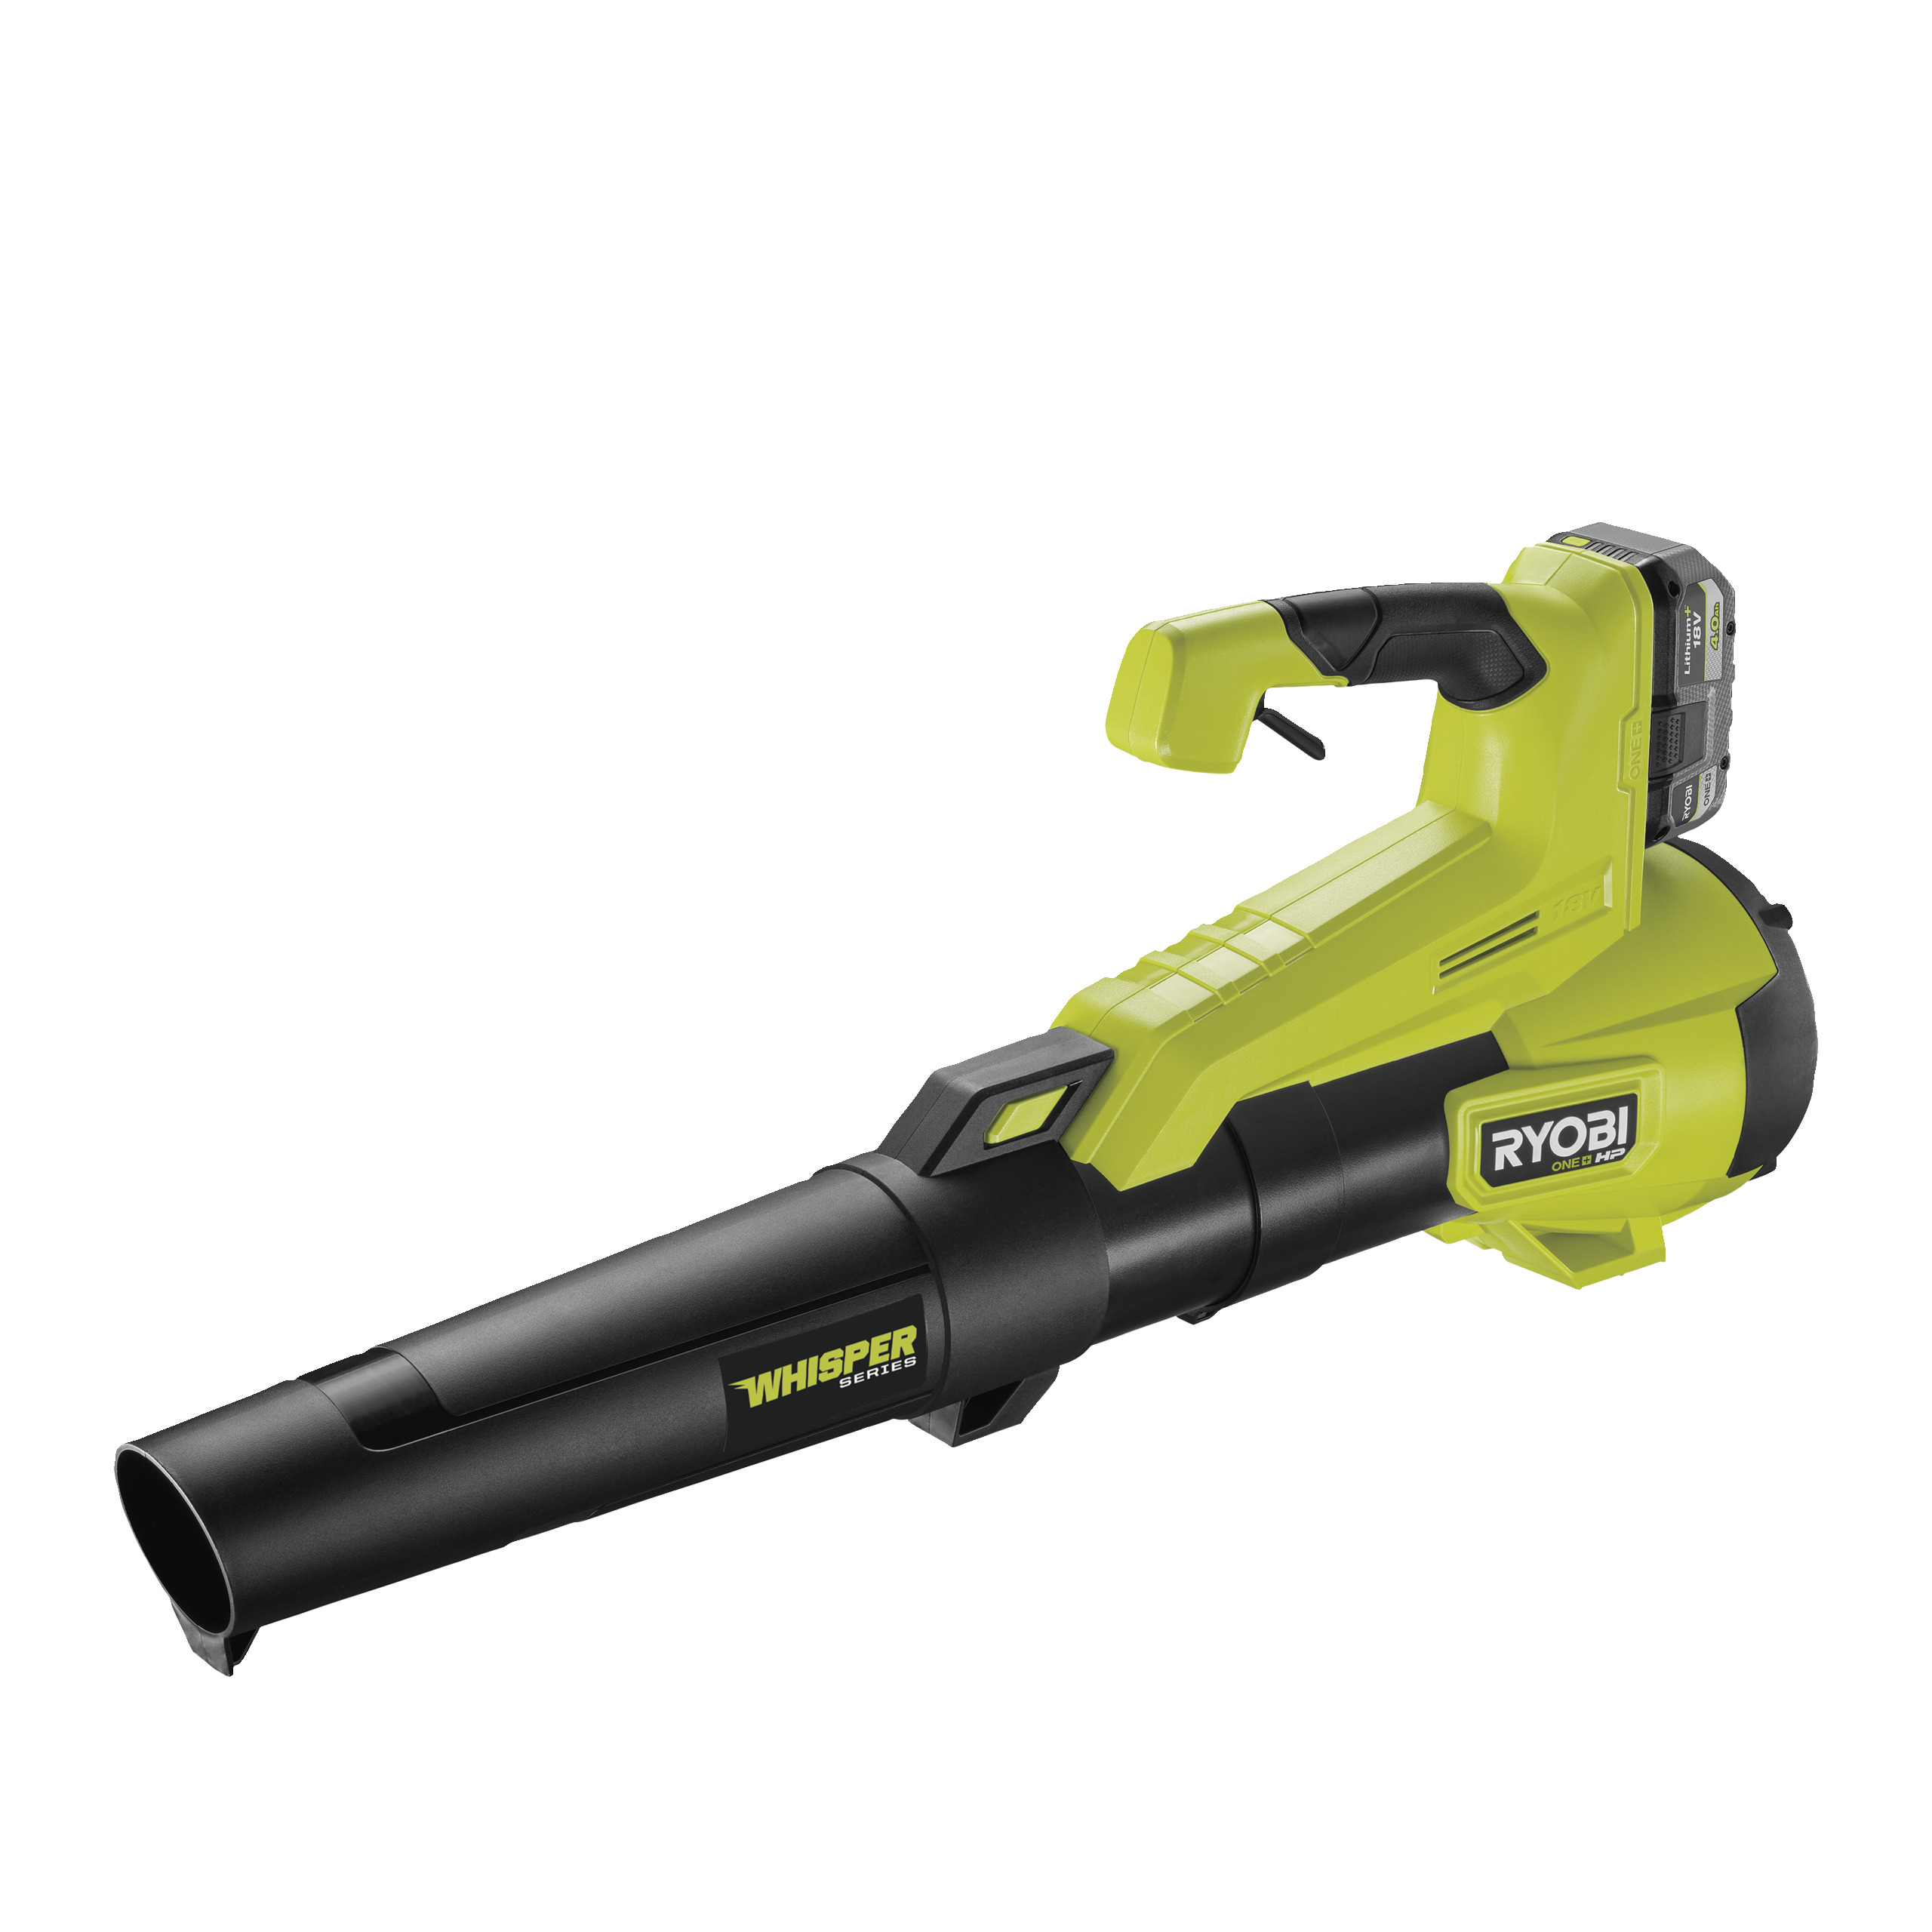 Battery and Charger Not Included Ryobi 40-Volt Baretool Lithium-Ion Cordless Jet Fan Leaf Blower with Variable-Speed 110 MPH 500 CFM; 2019 Model RY40460 